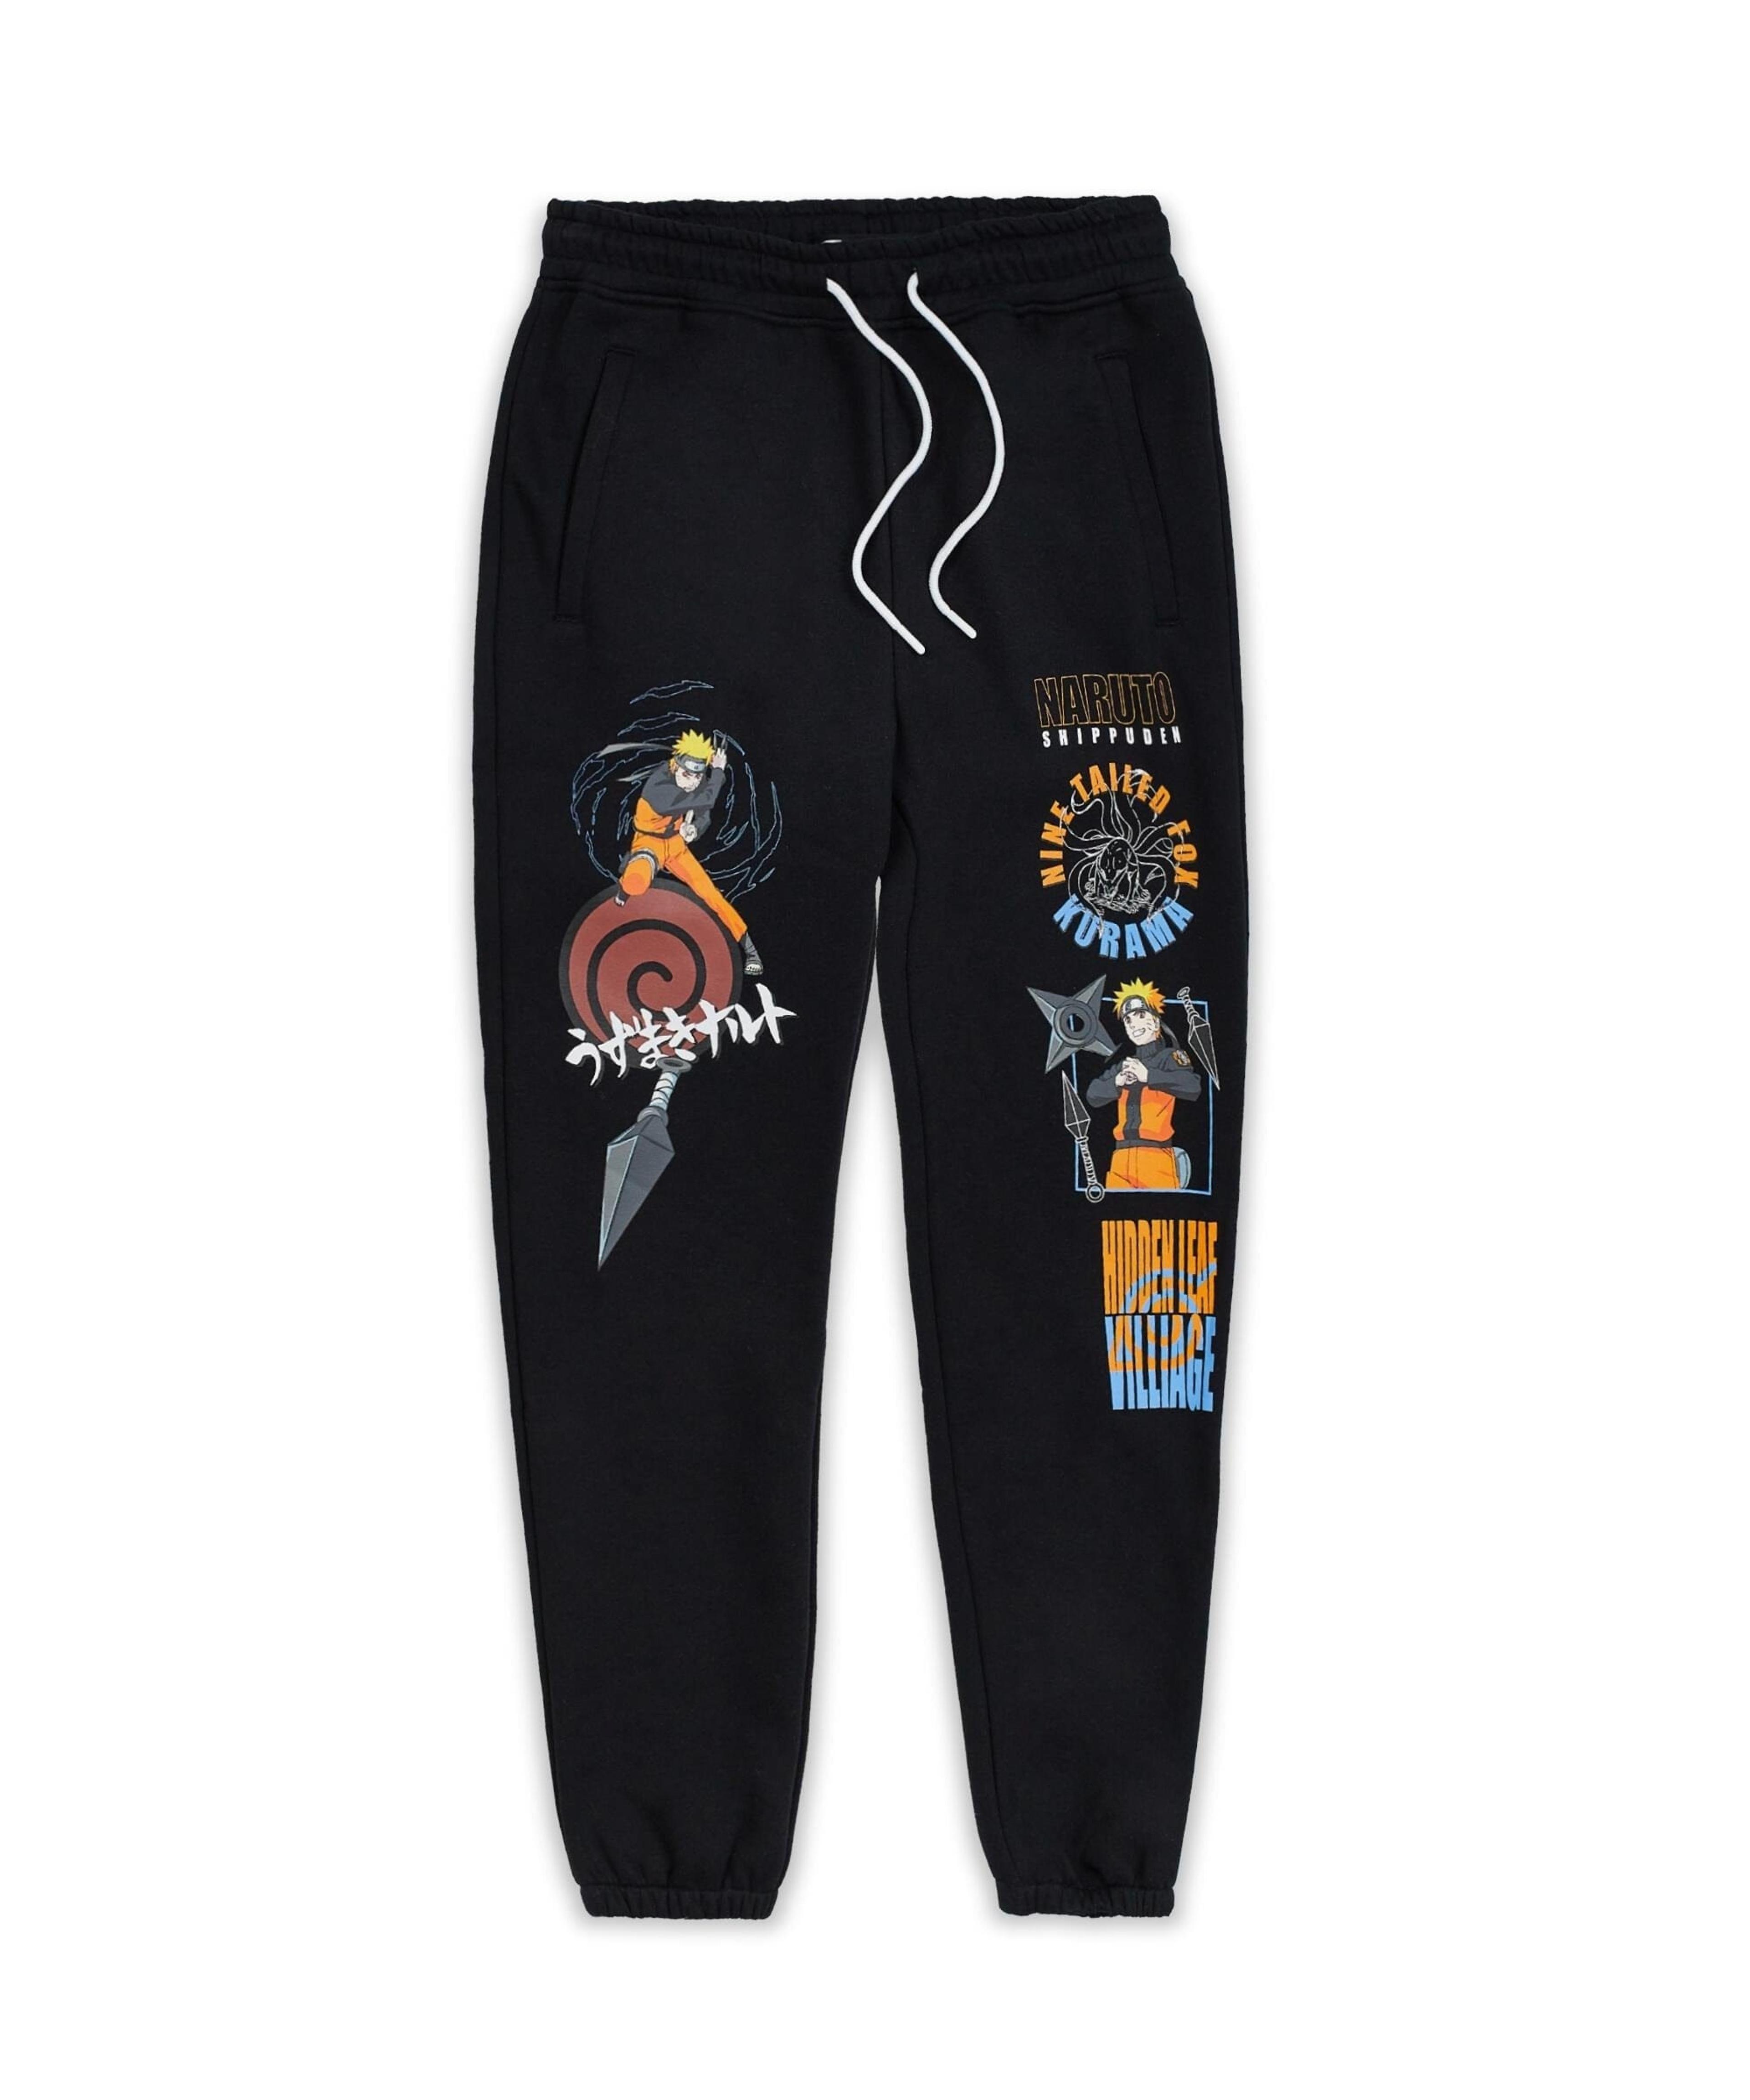 Alternate View 5 of Naruto Placement Joggers